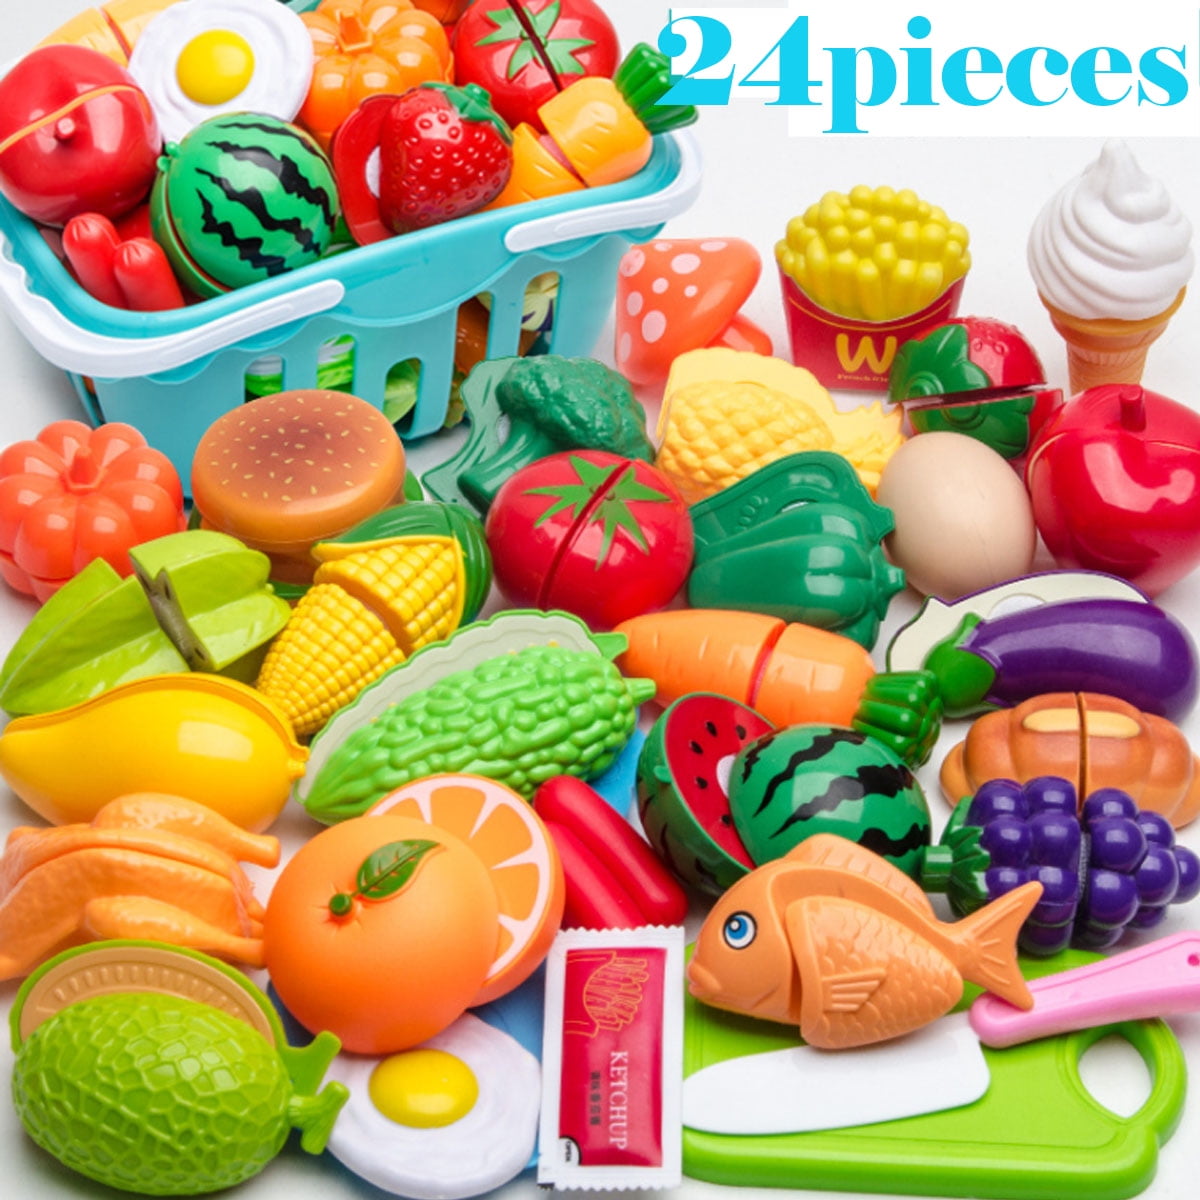 Wooden Play Food Chopping Toy Set Pretend Play Kitchen Accessorise Vegetables 